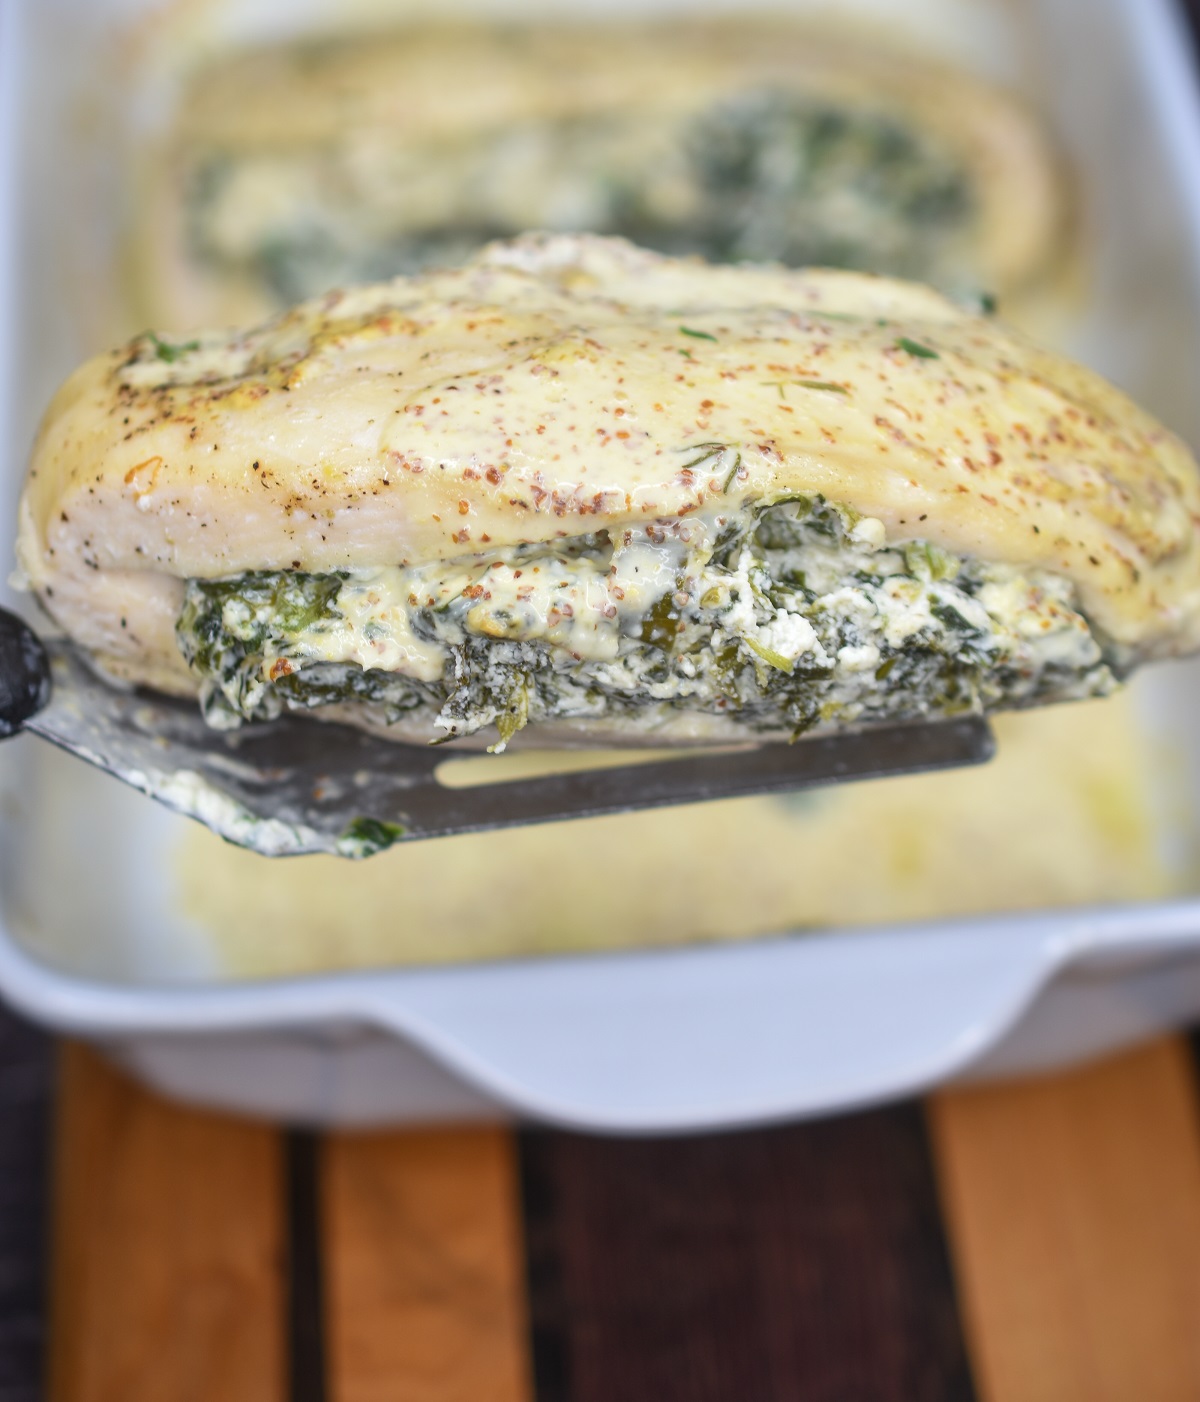 Cream Cheese and Spinach Stuffed Chicken Breasts. Low carb friendly.